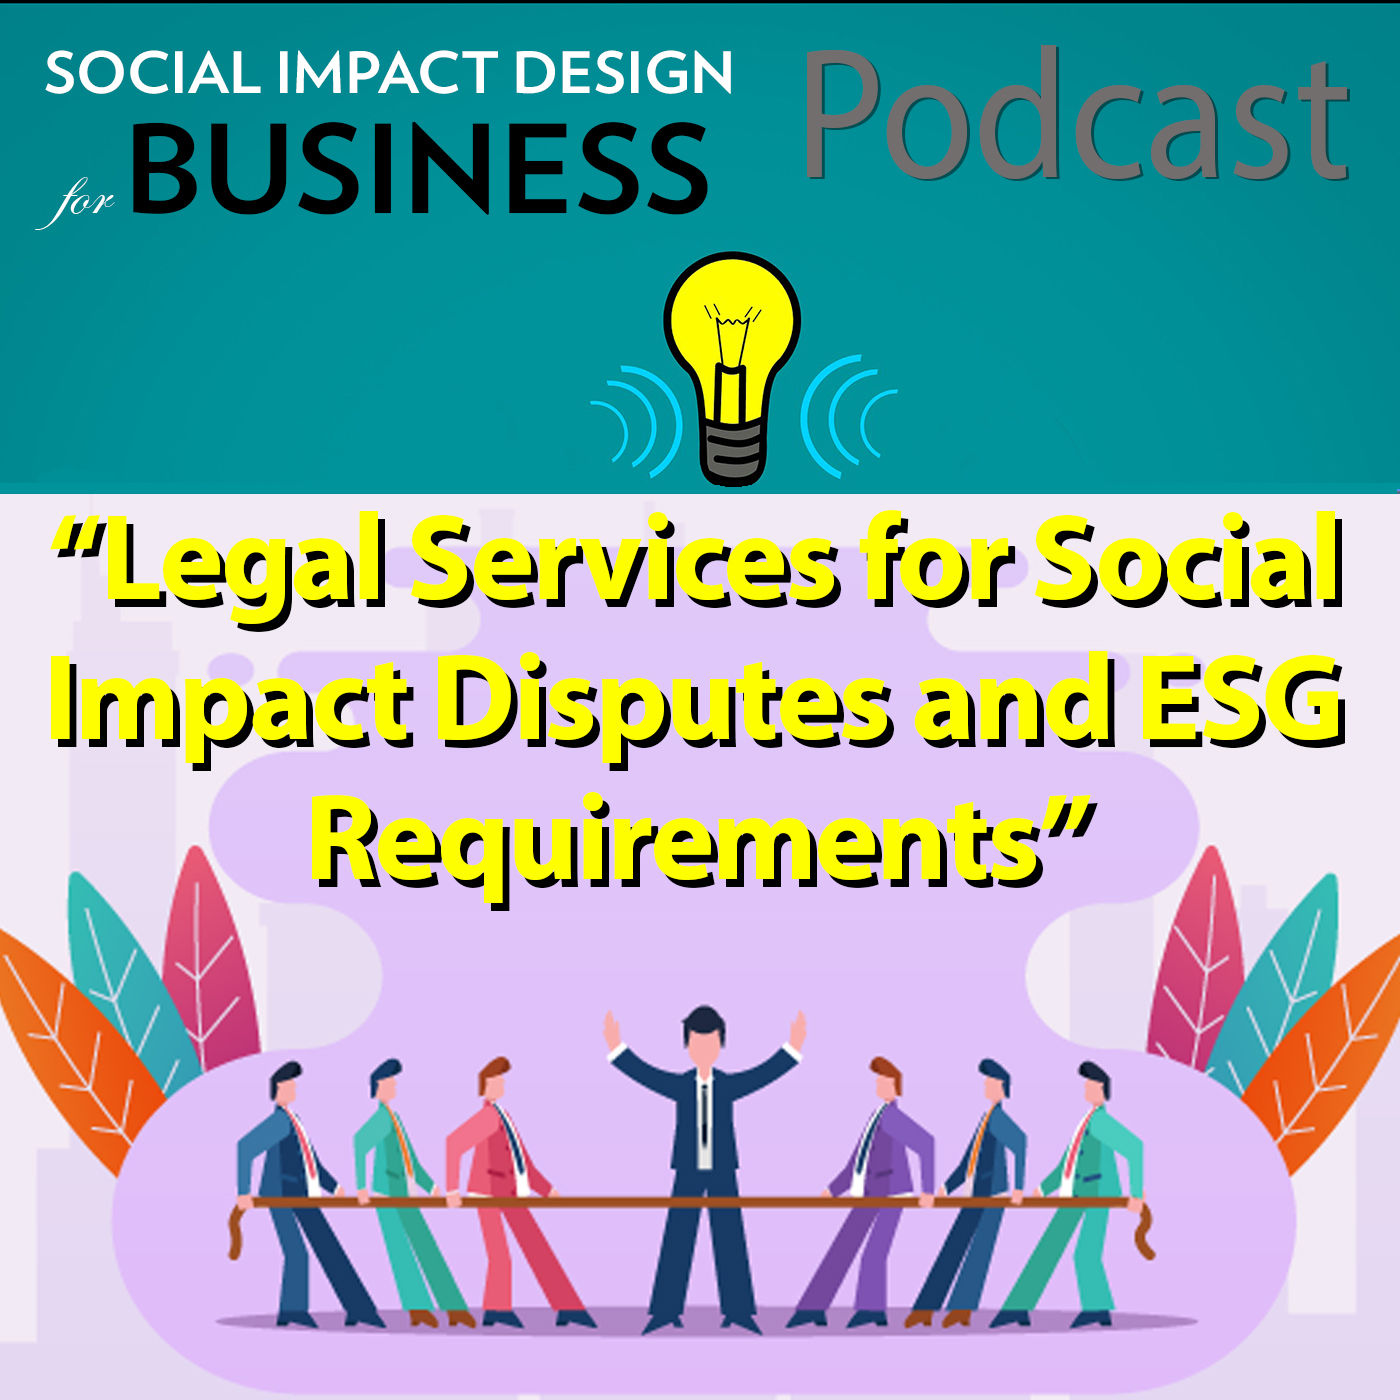 Podcast: Legal Services for Social Impact Disputes and ESG Requirements